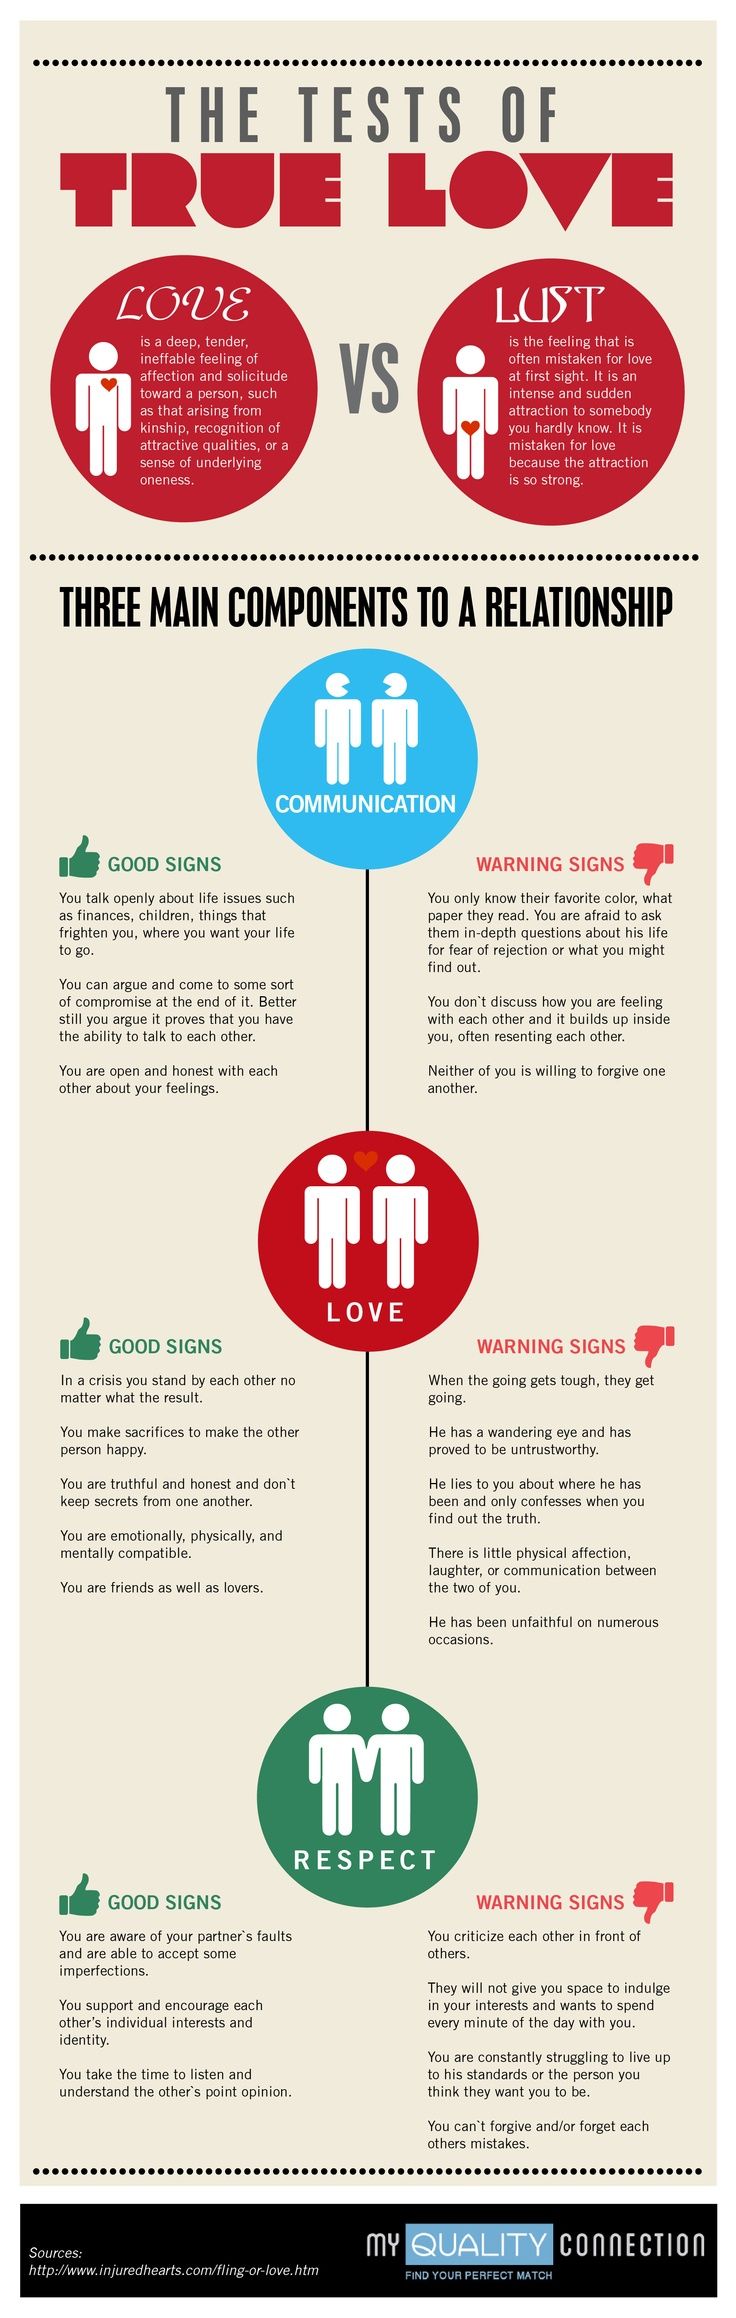 5 Things To Practice for Effective Communication Skills